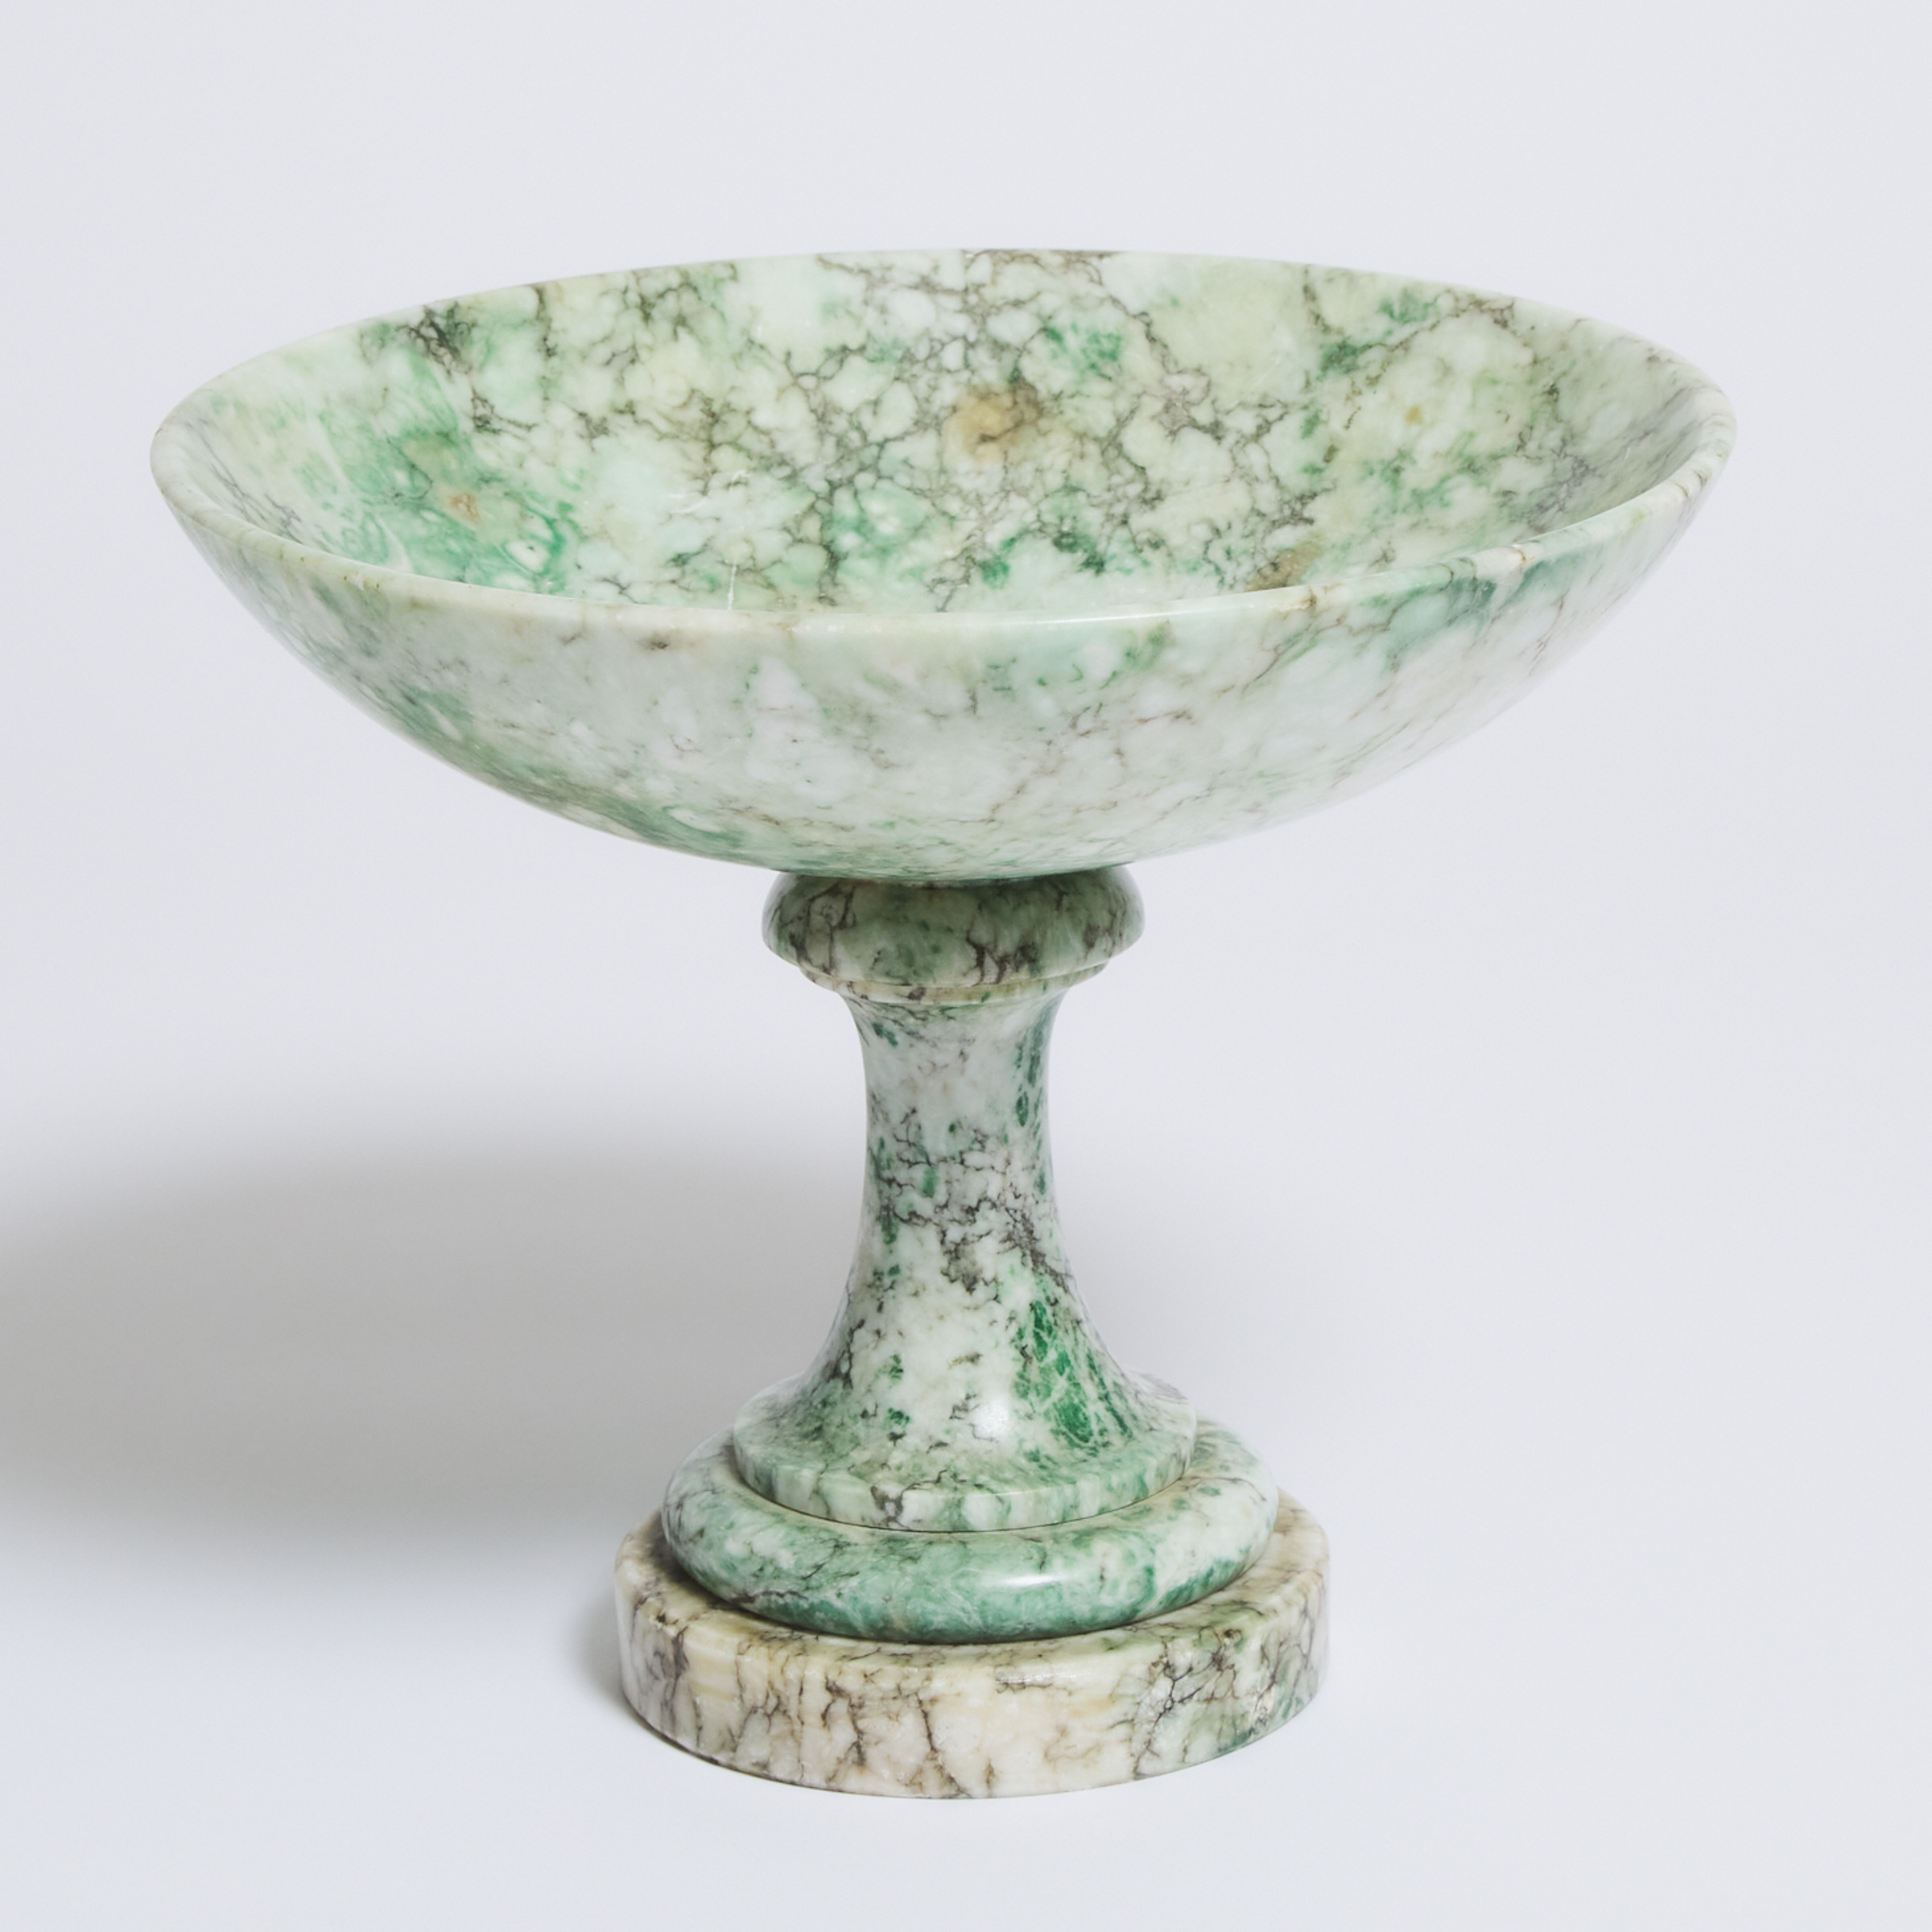 Italian Turned Alabaster Comport Centrepiece Bowl, early-mid 20th century